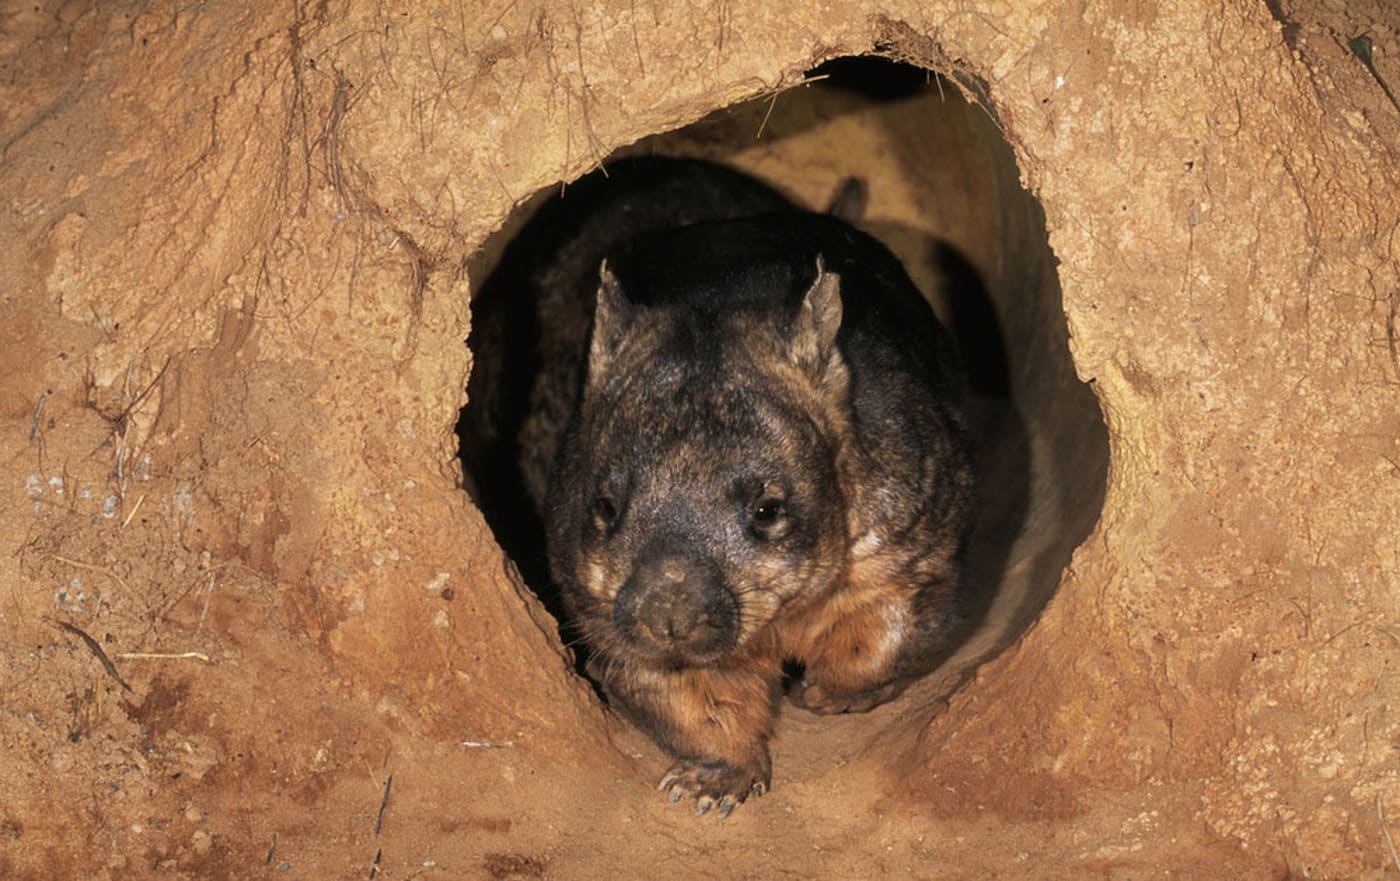 A wombat in its burrow